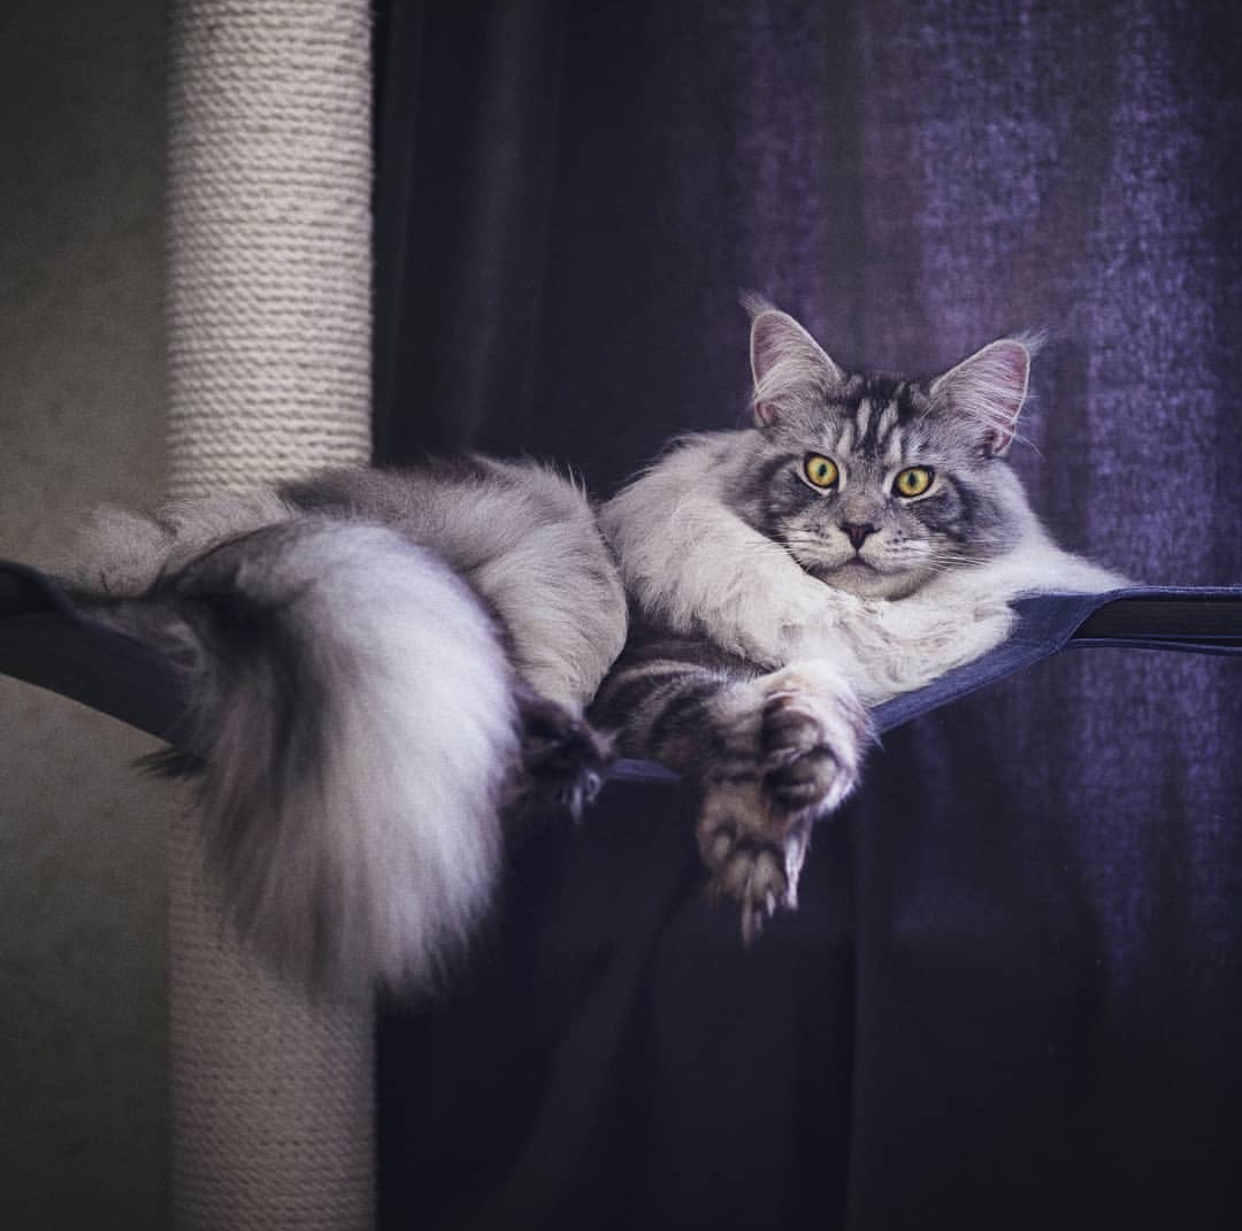 Maine Coon Cat with gray and white fur color lying on its hanging bed